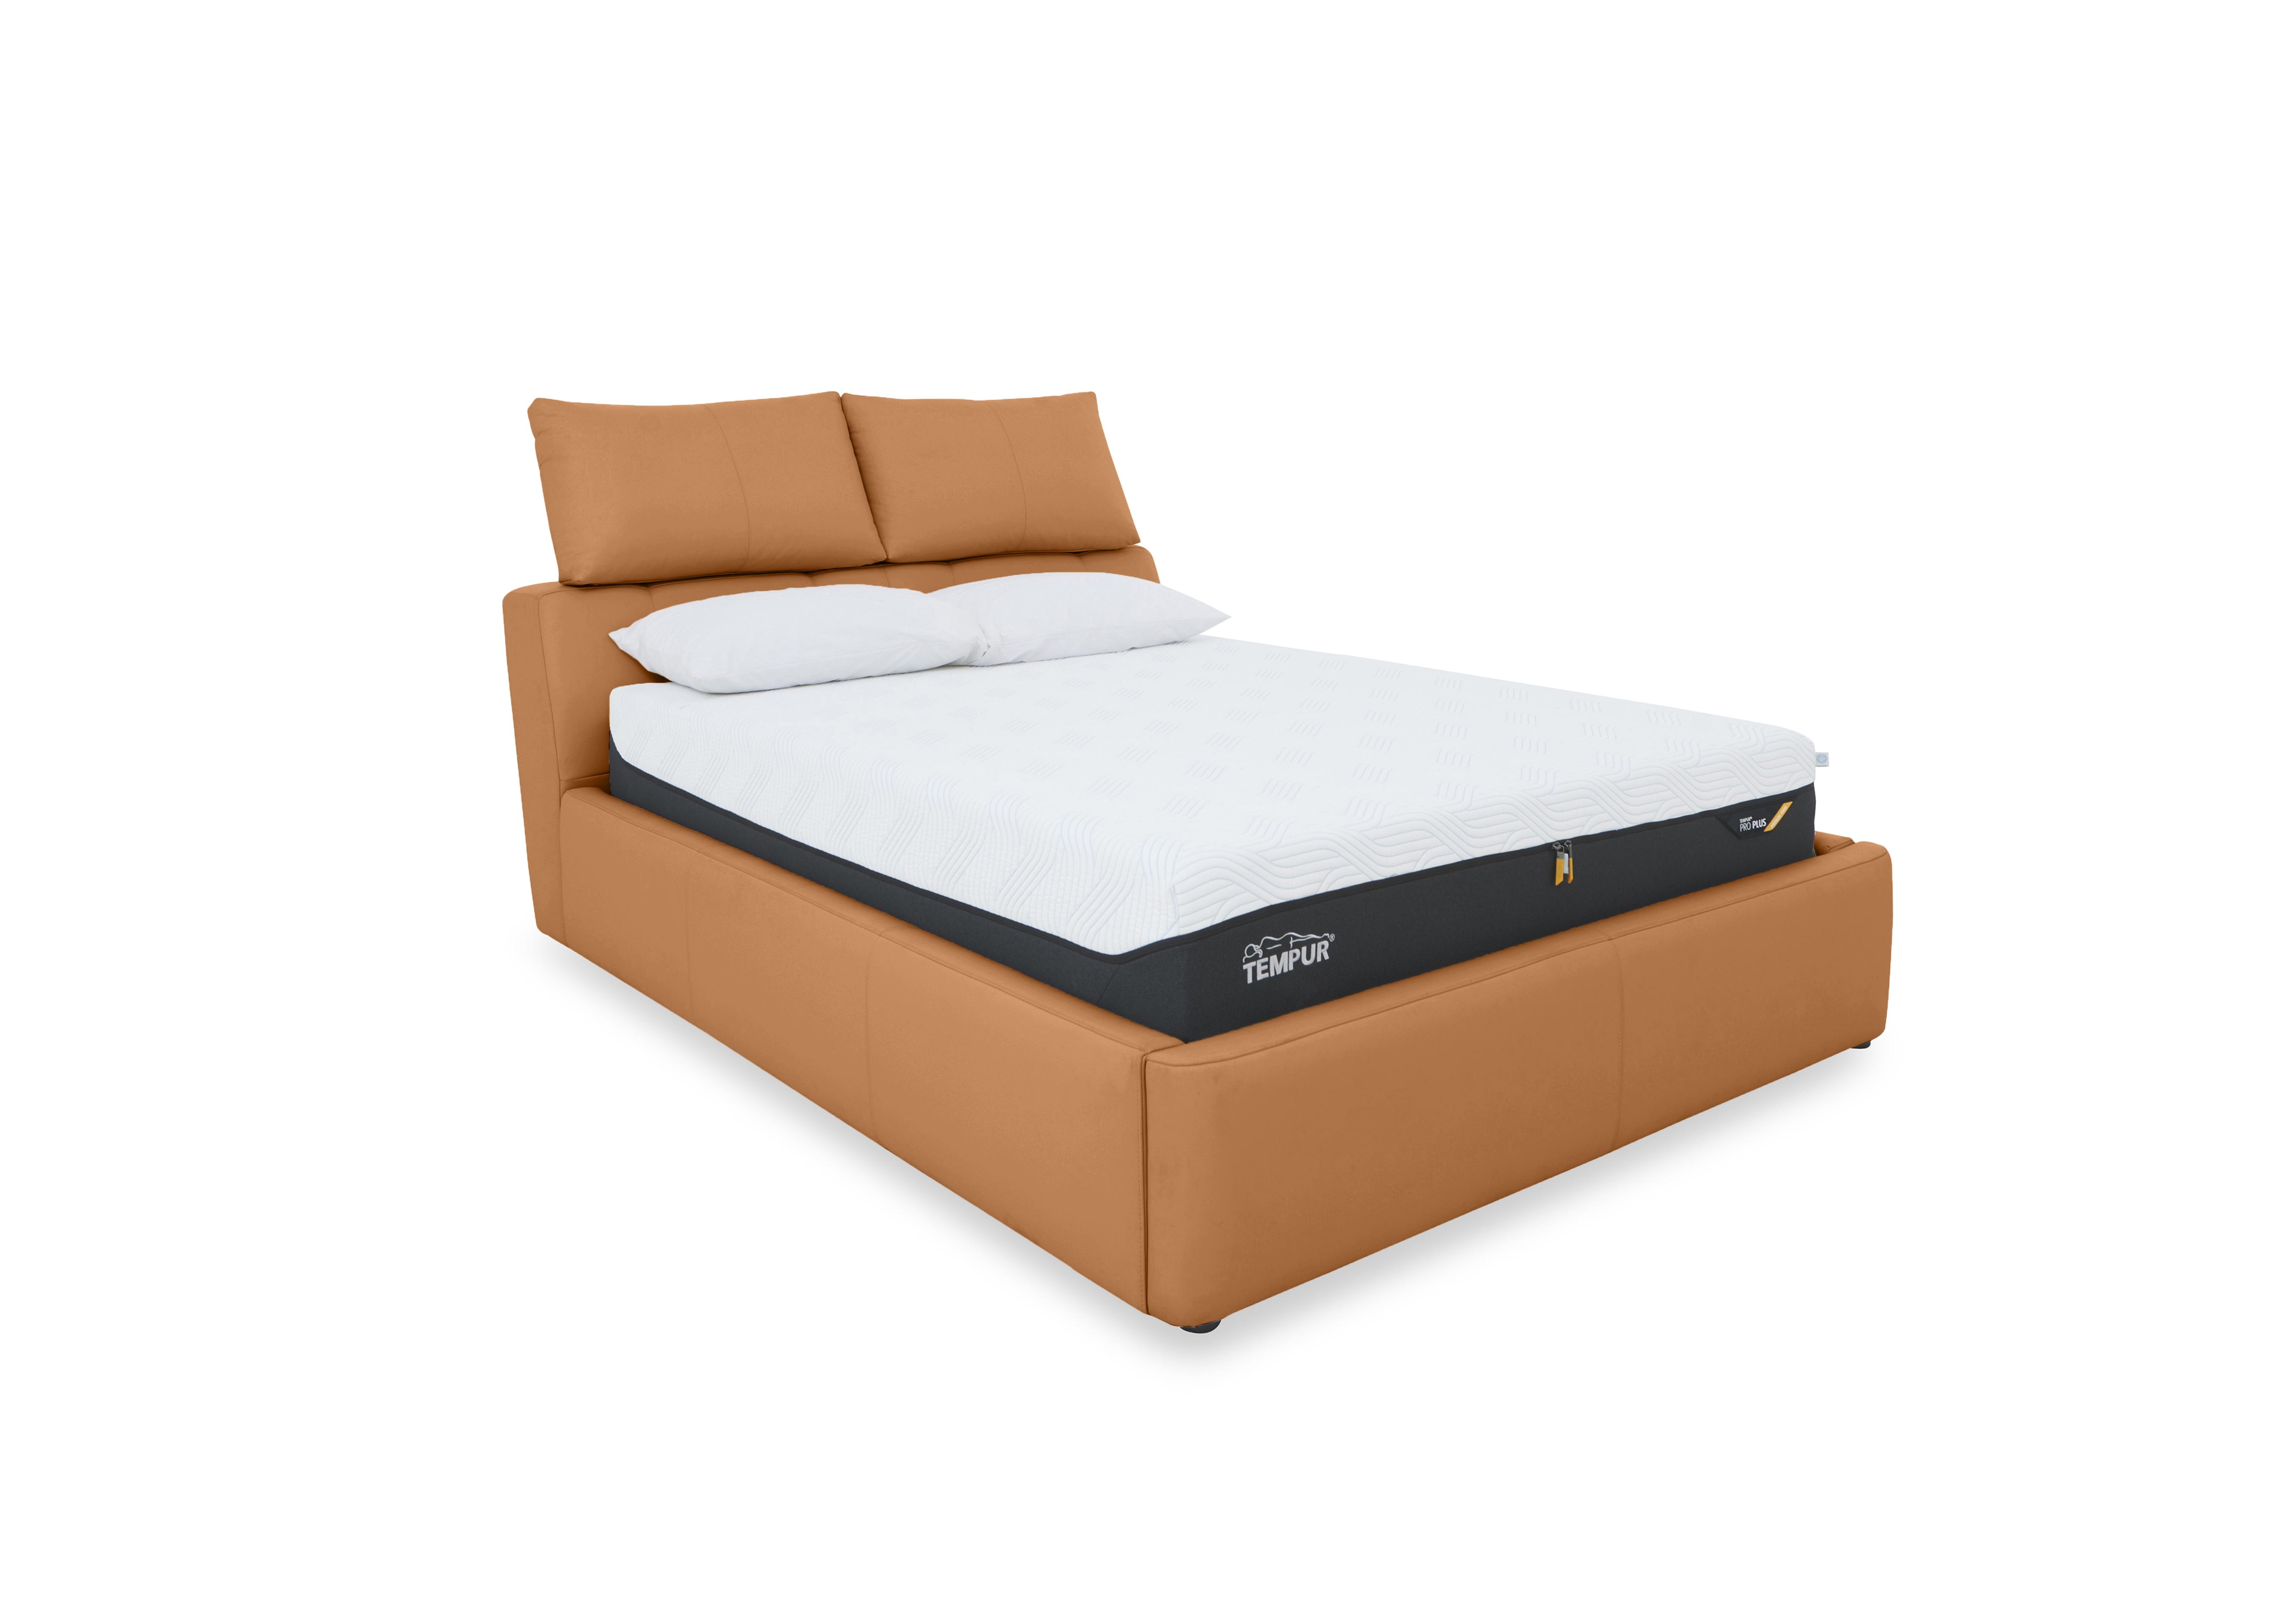 Tyrell Leather Manual Ottoman Bed Frame in Bv-335e Honey Yellow on Furniture Village